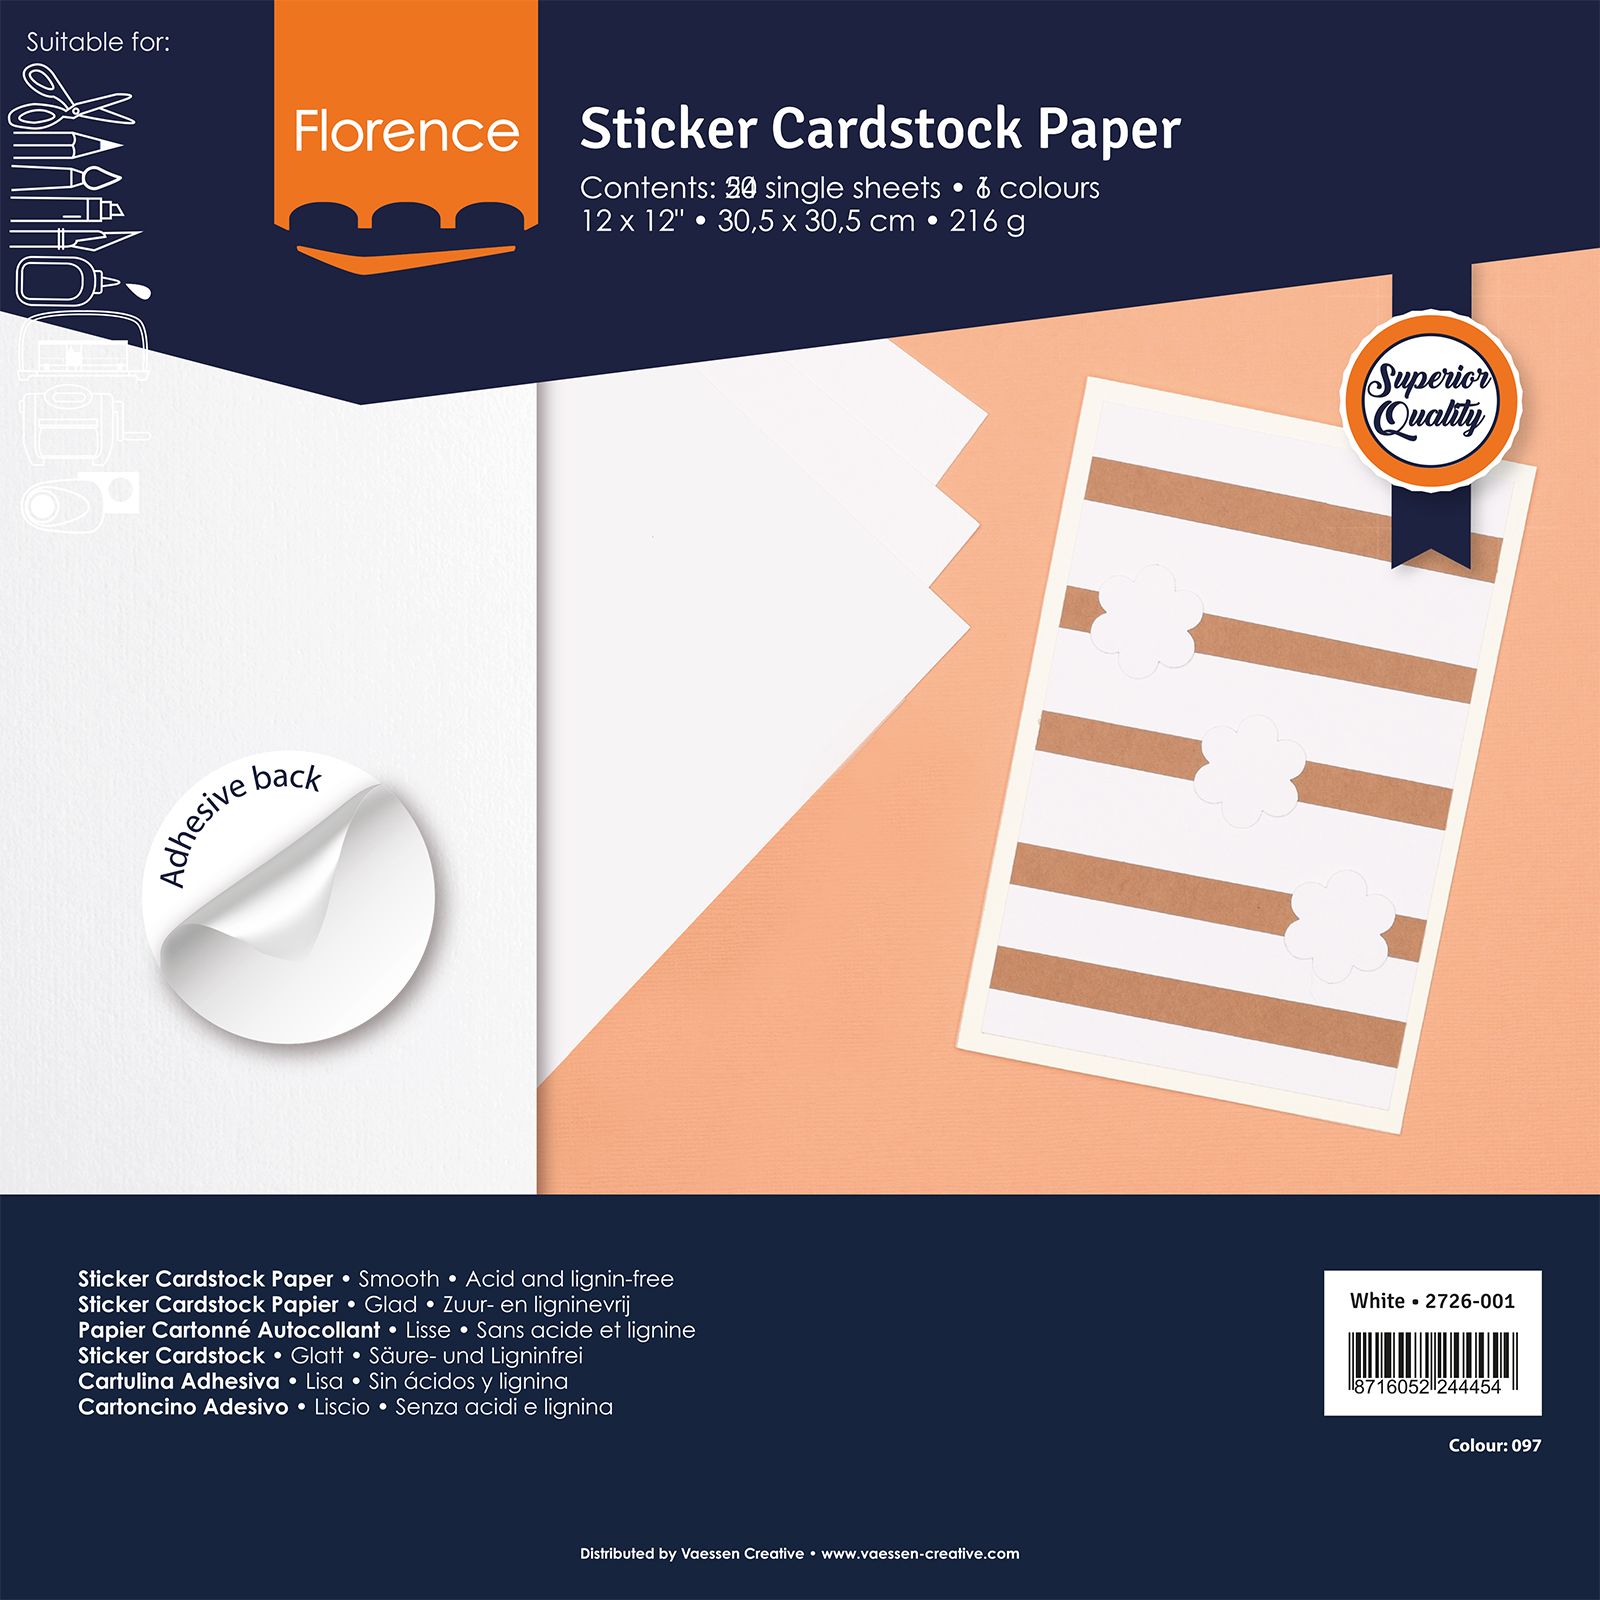 Sticker Cardstock Paper, Direct Adhesive